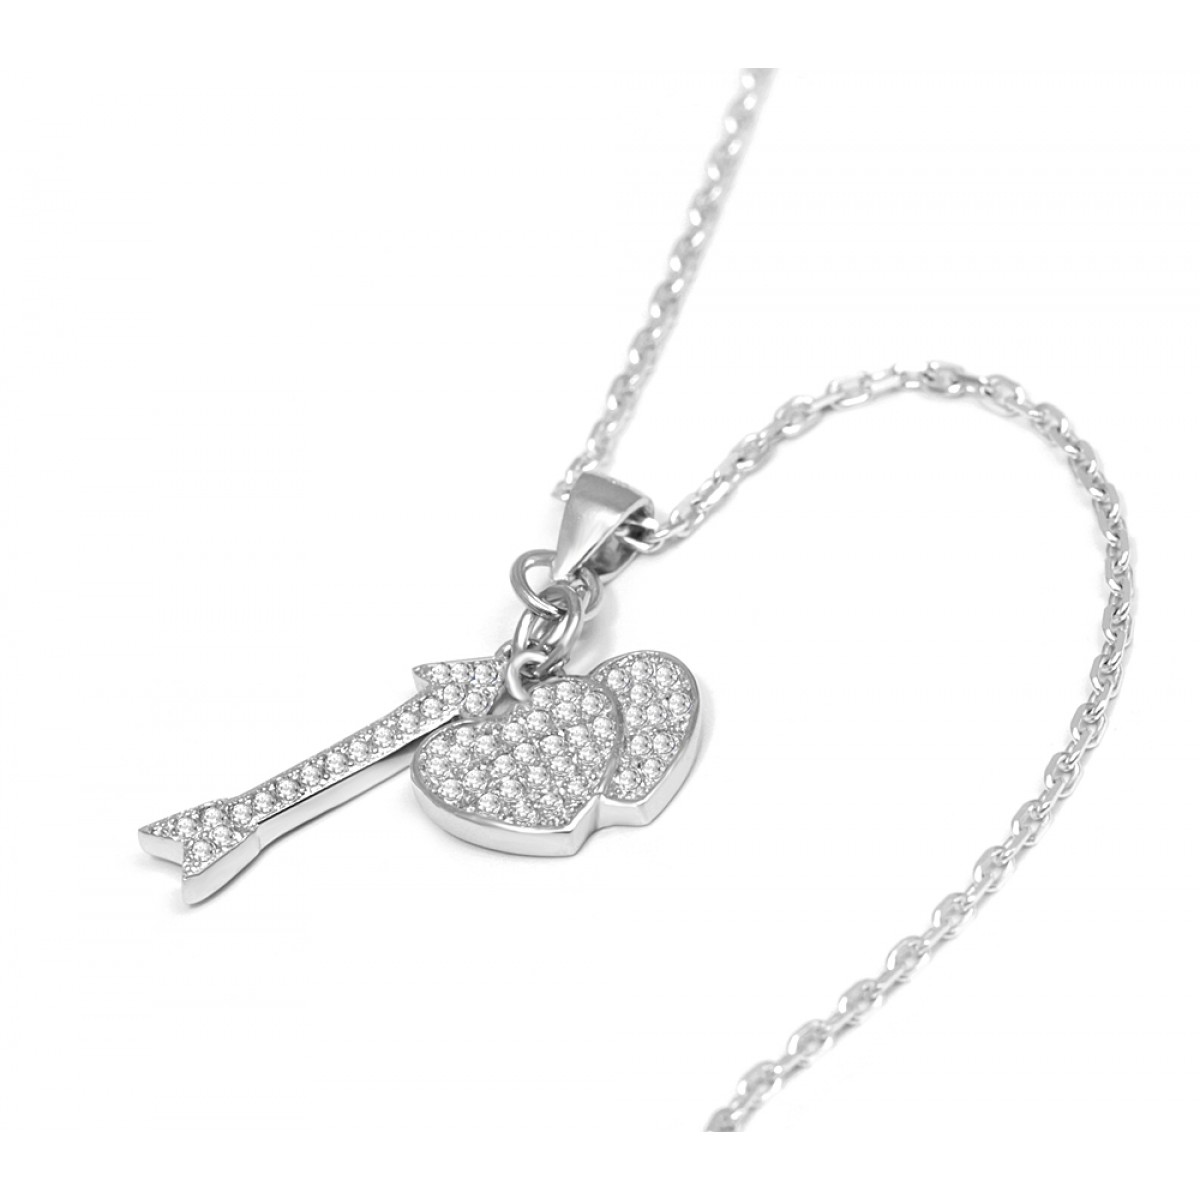 Buy Sterling Silver Love Necklace in Silver Necklaces